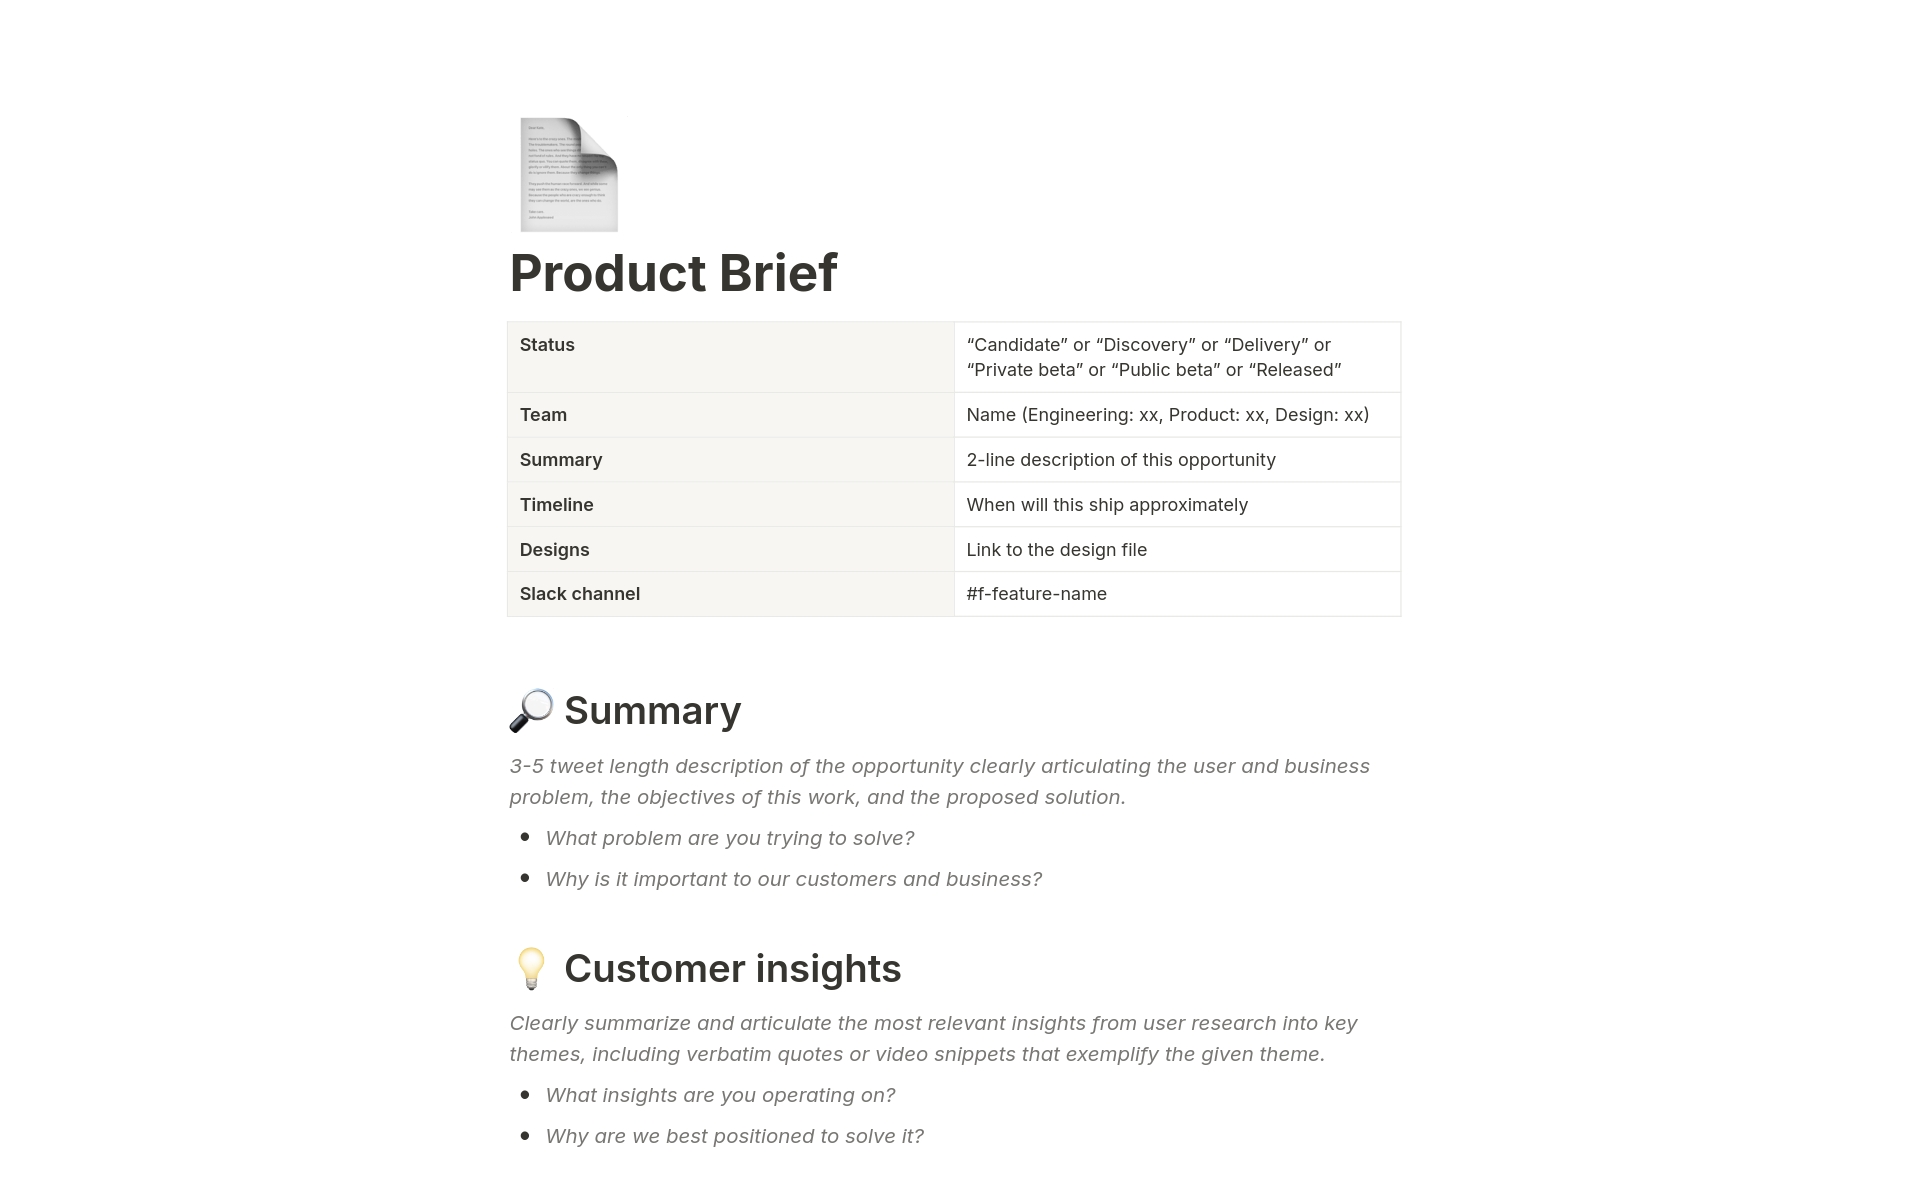 Use this Product Brief template to ensure alignment at the right moments and prevent any misaligned expectations around the problem, scope, and timeline. It also enables you to gather feedback, improve your thinking, and leverage any knowledge floating in the organization.